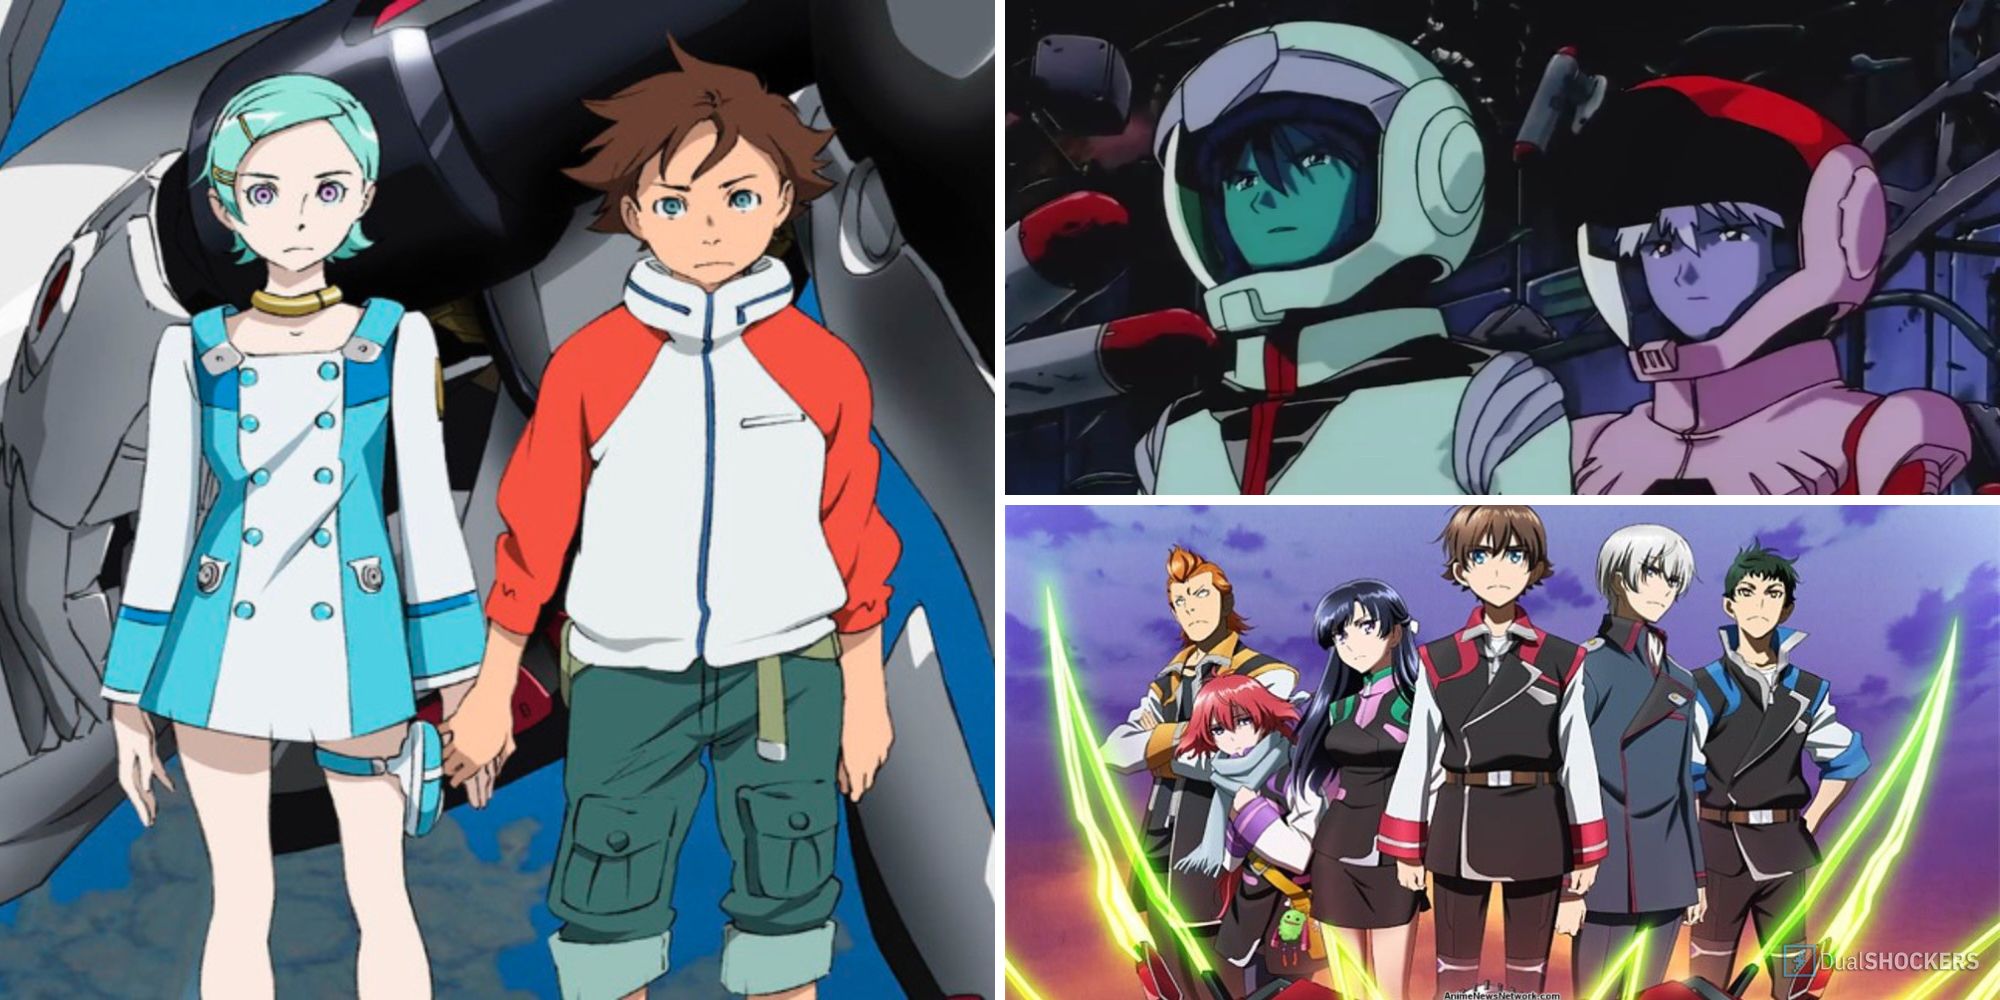 5 Mecha Anime That Will Make You Fall in Love With the Genre